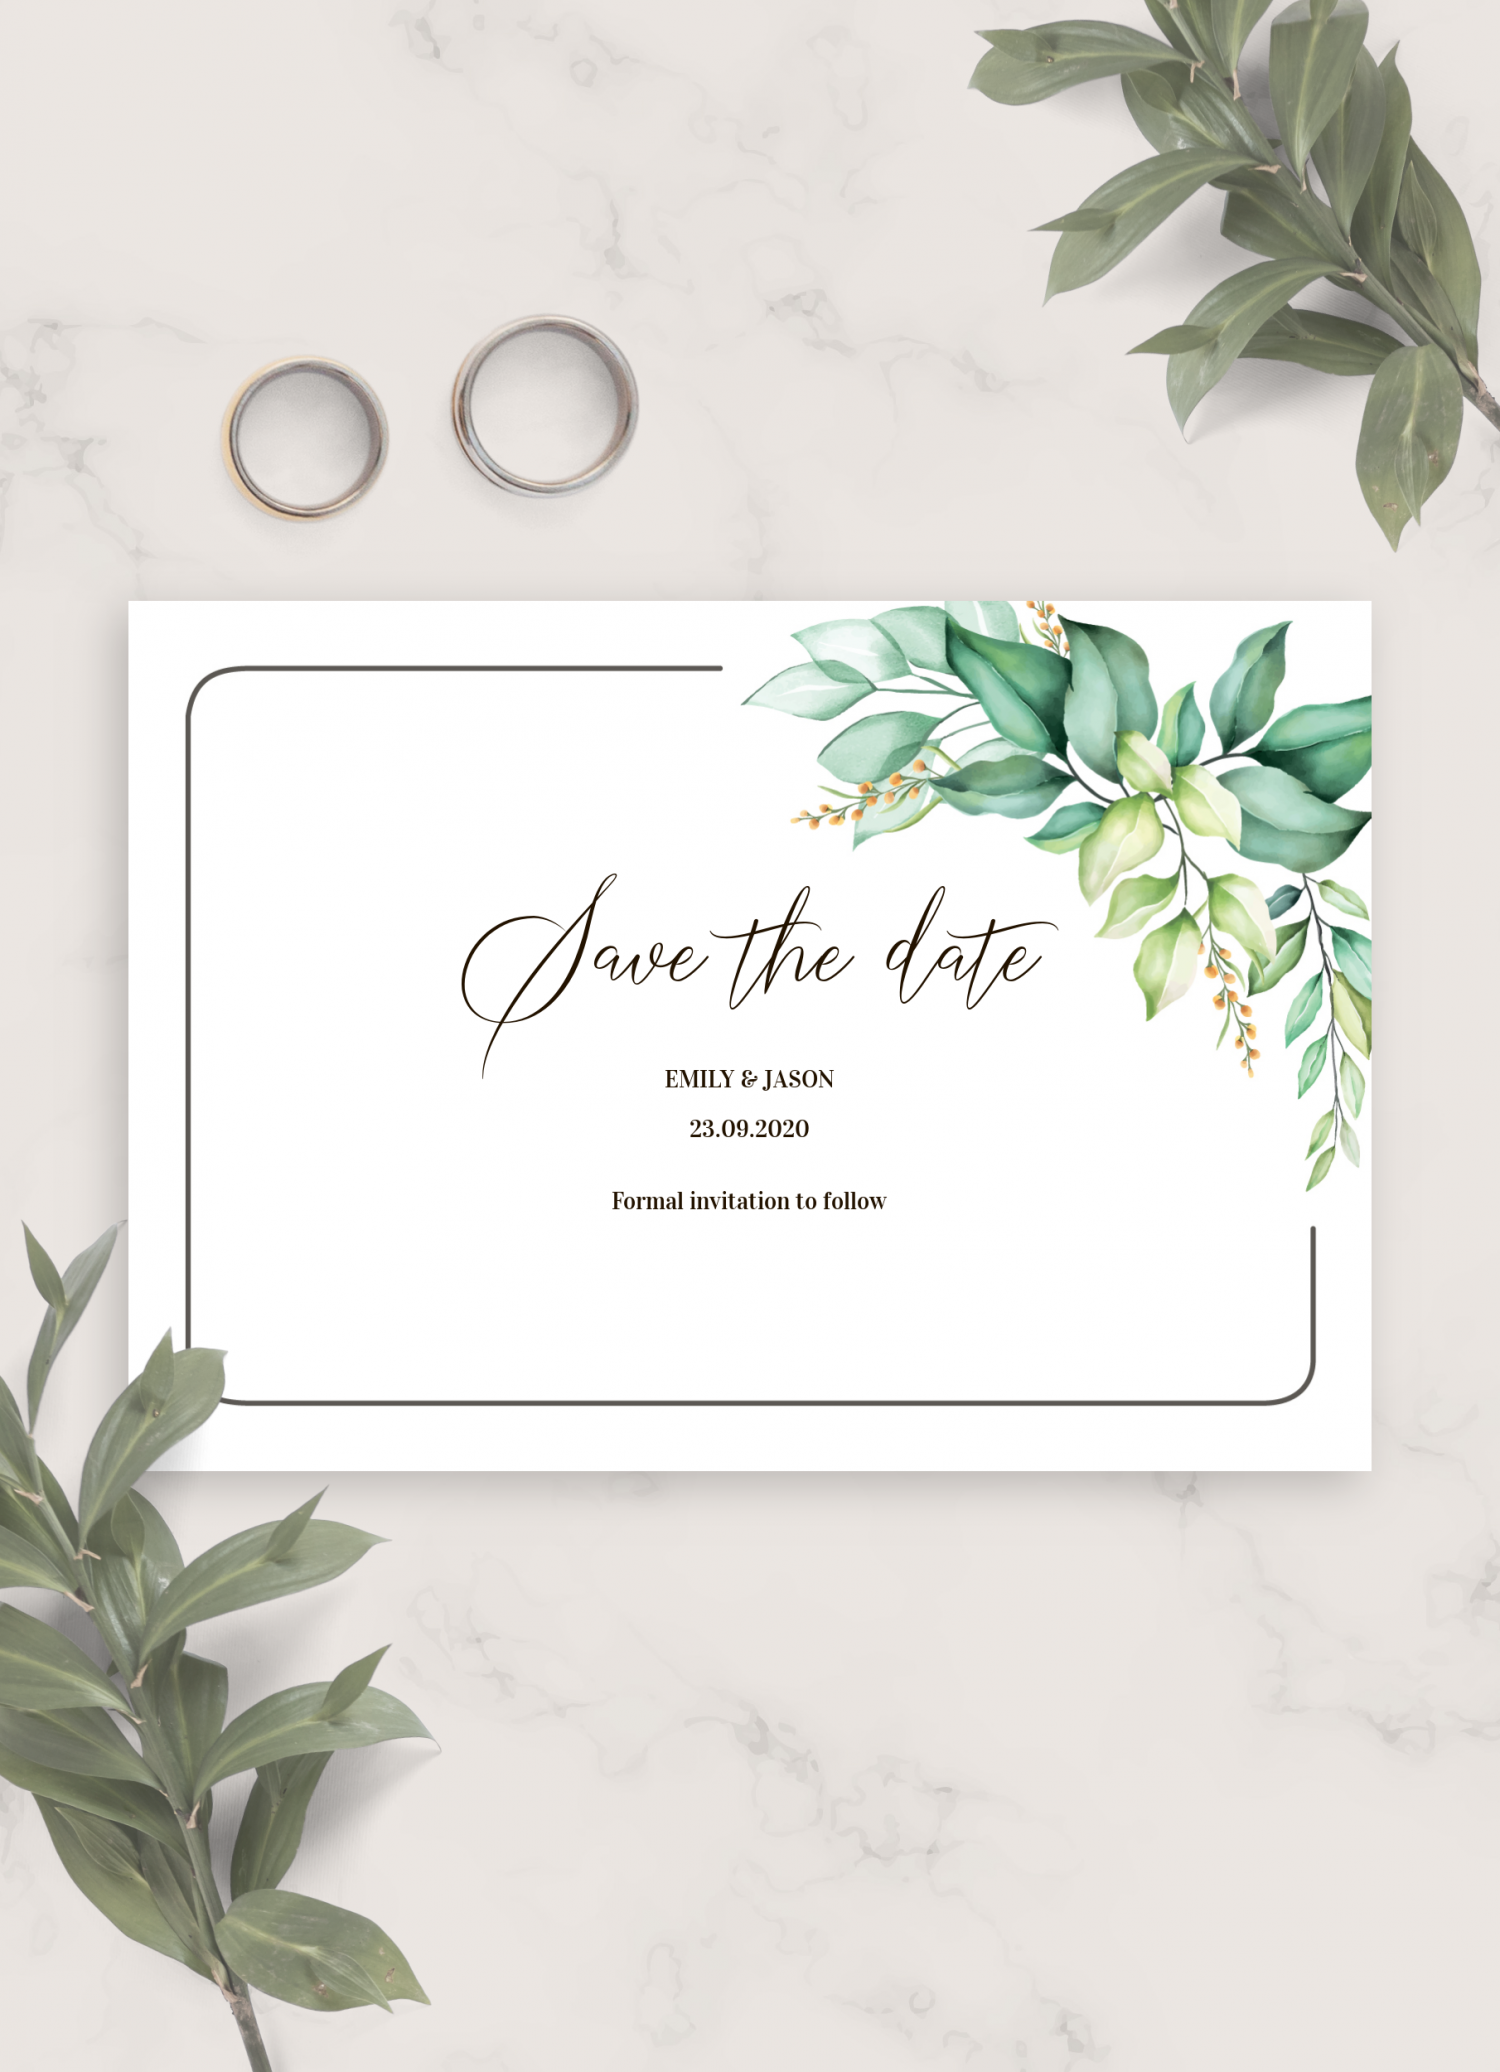 Bohemian Save the Date Editable Printable Floral and Greenery Save the Date Invitation Template Boho Wedding Save The Date Invitation